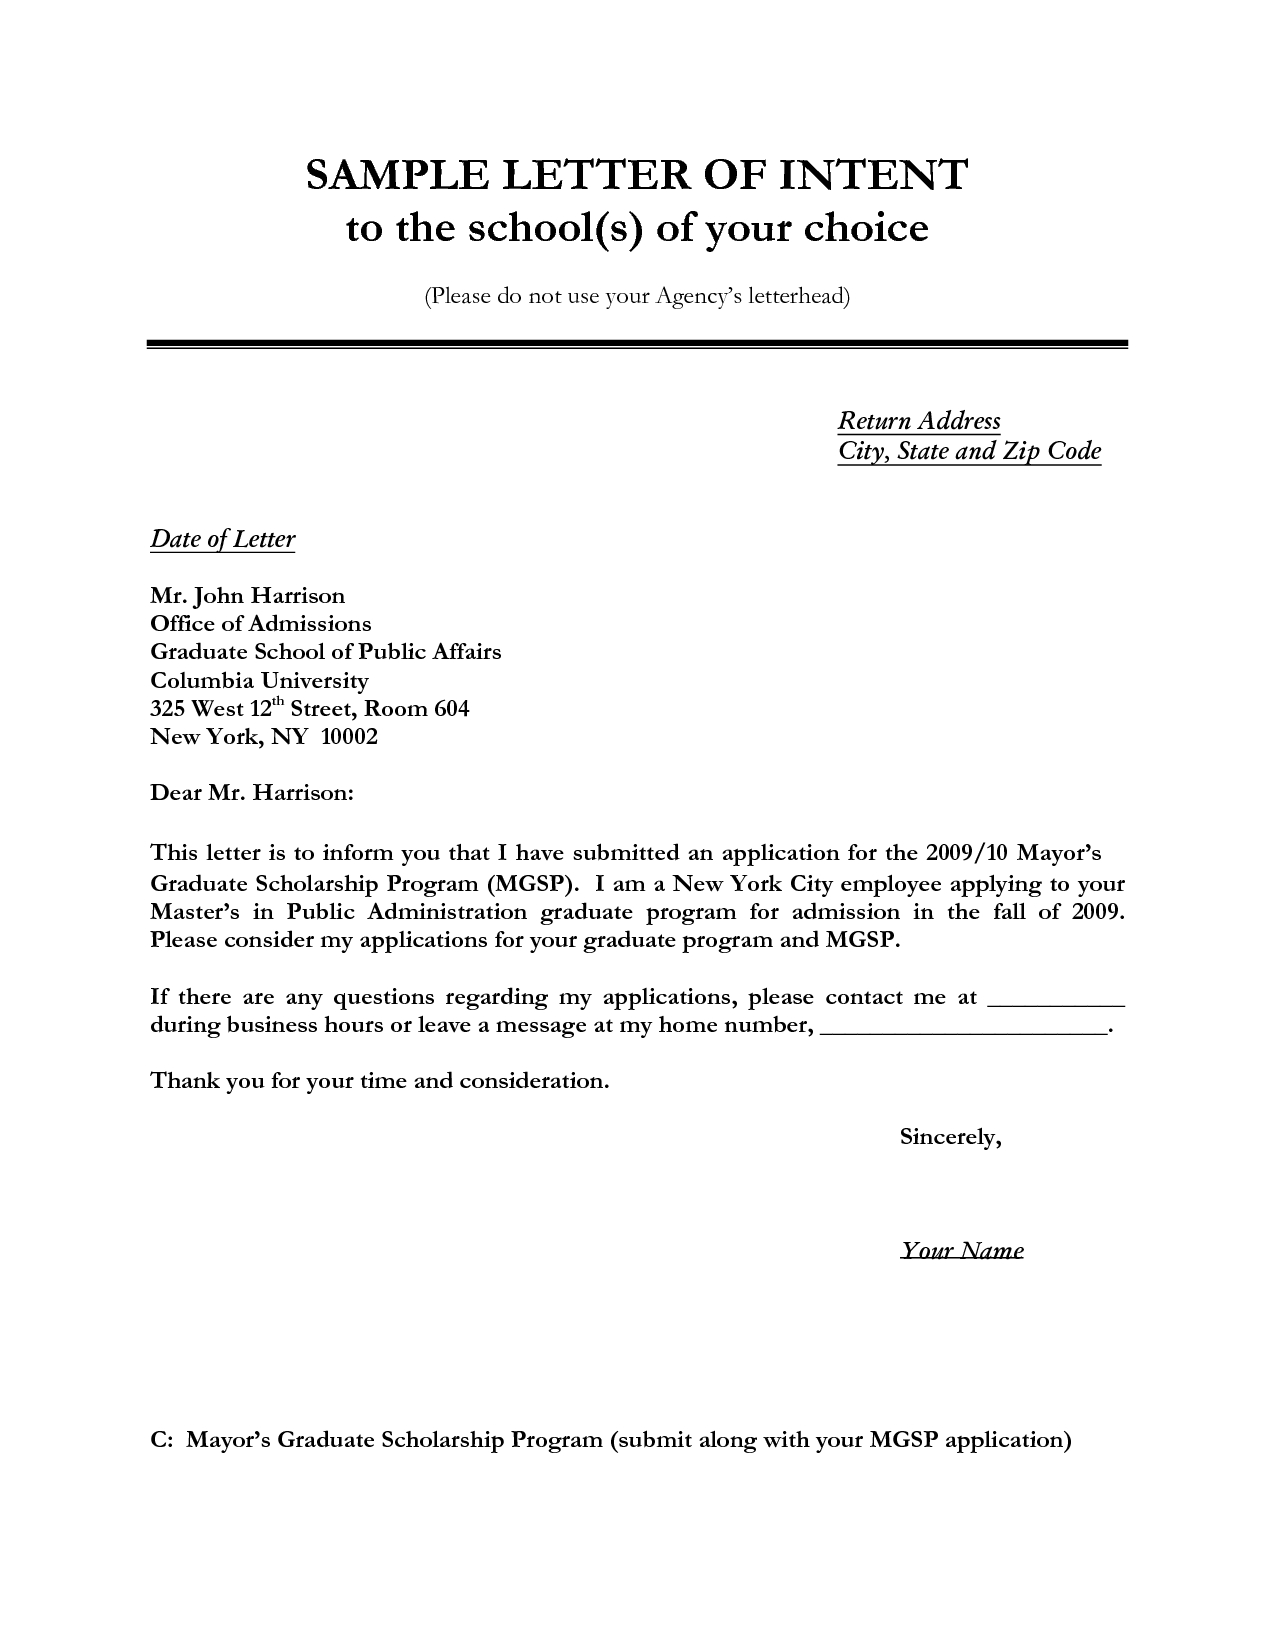 real estate letter of intent template free example-Letter of intent sample 8-d